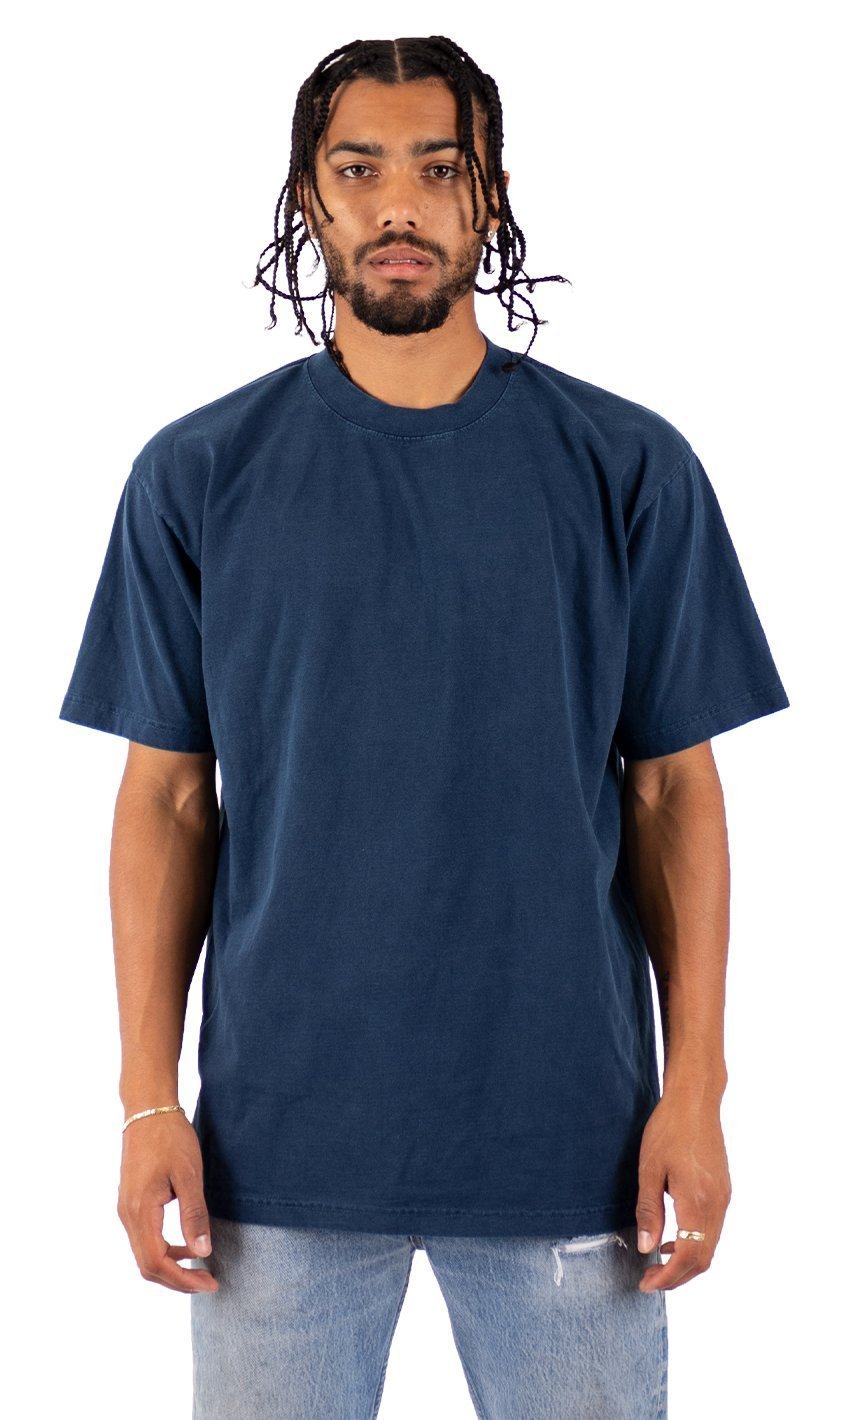 Executive Function garment-dyed heavyweight t-shirt from Invisible